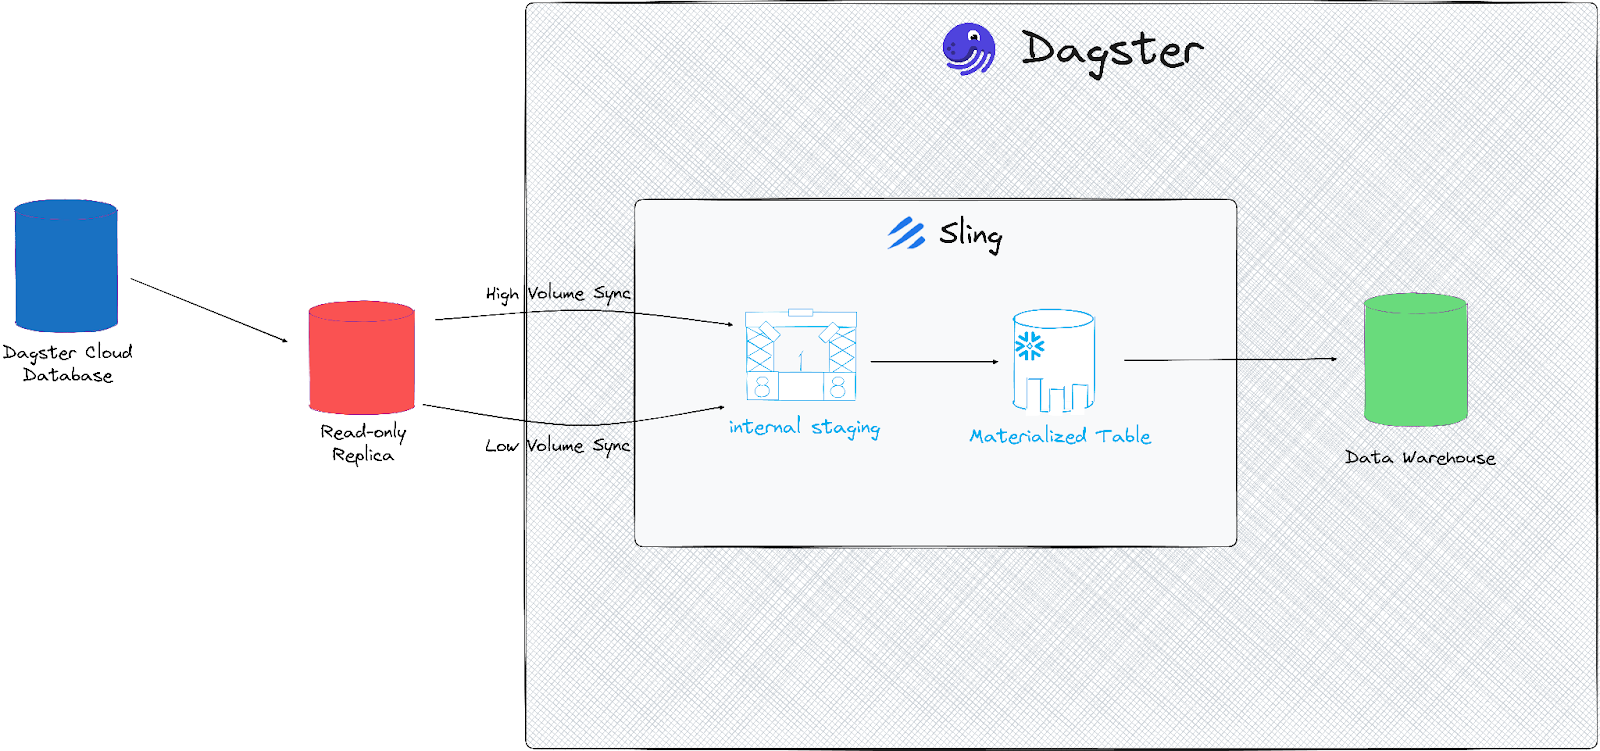 A chart of showing the flow of data from Dagster's cloud database to a data warehouse.